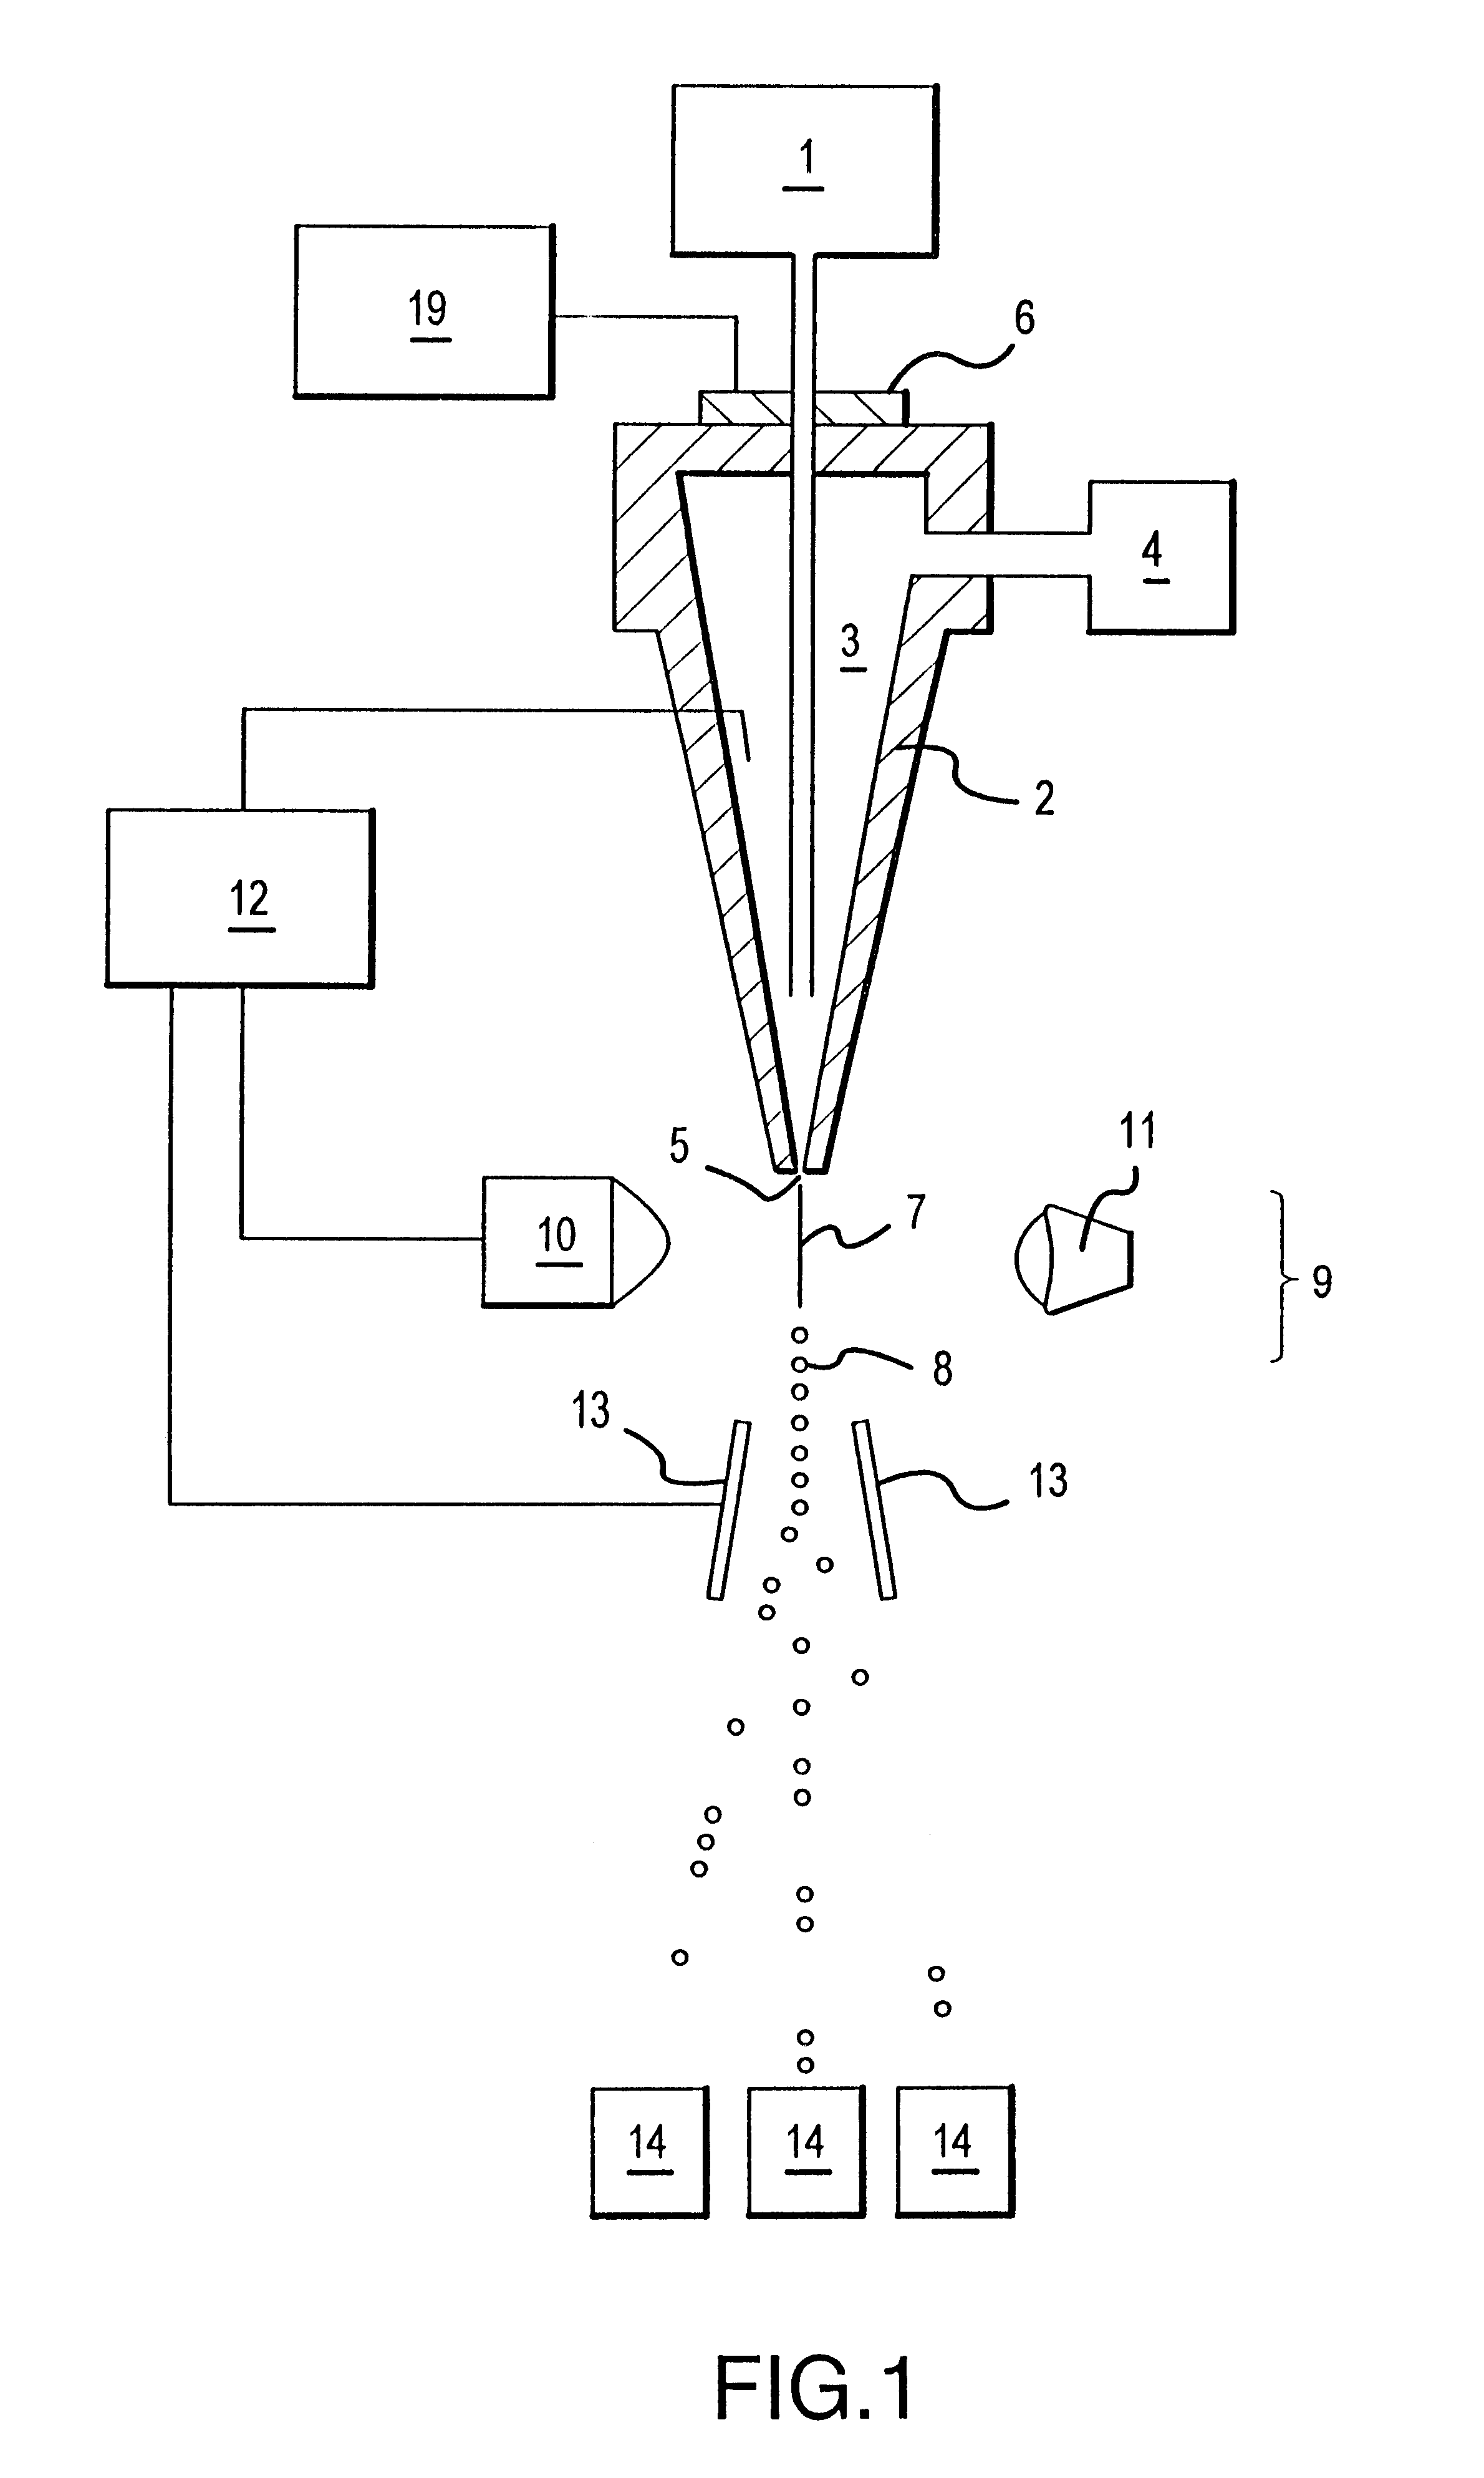 Methods for improving sheath fluids and collection systems for sex-specific cytometer sorting of sperm